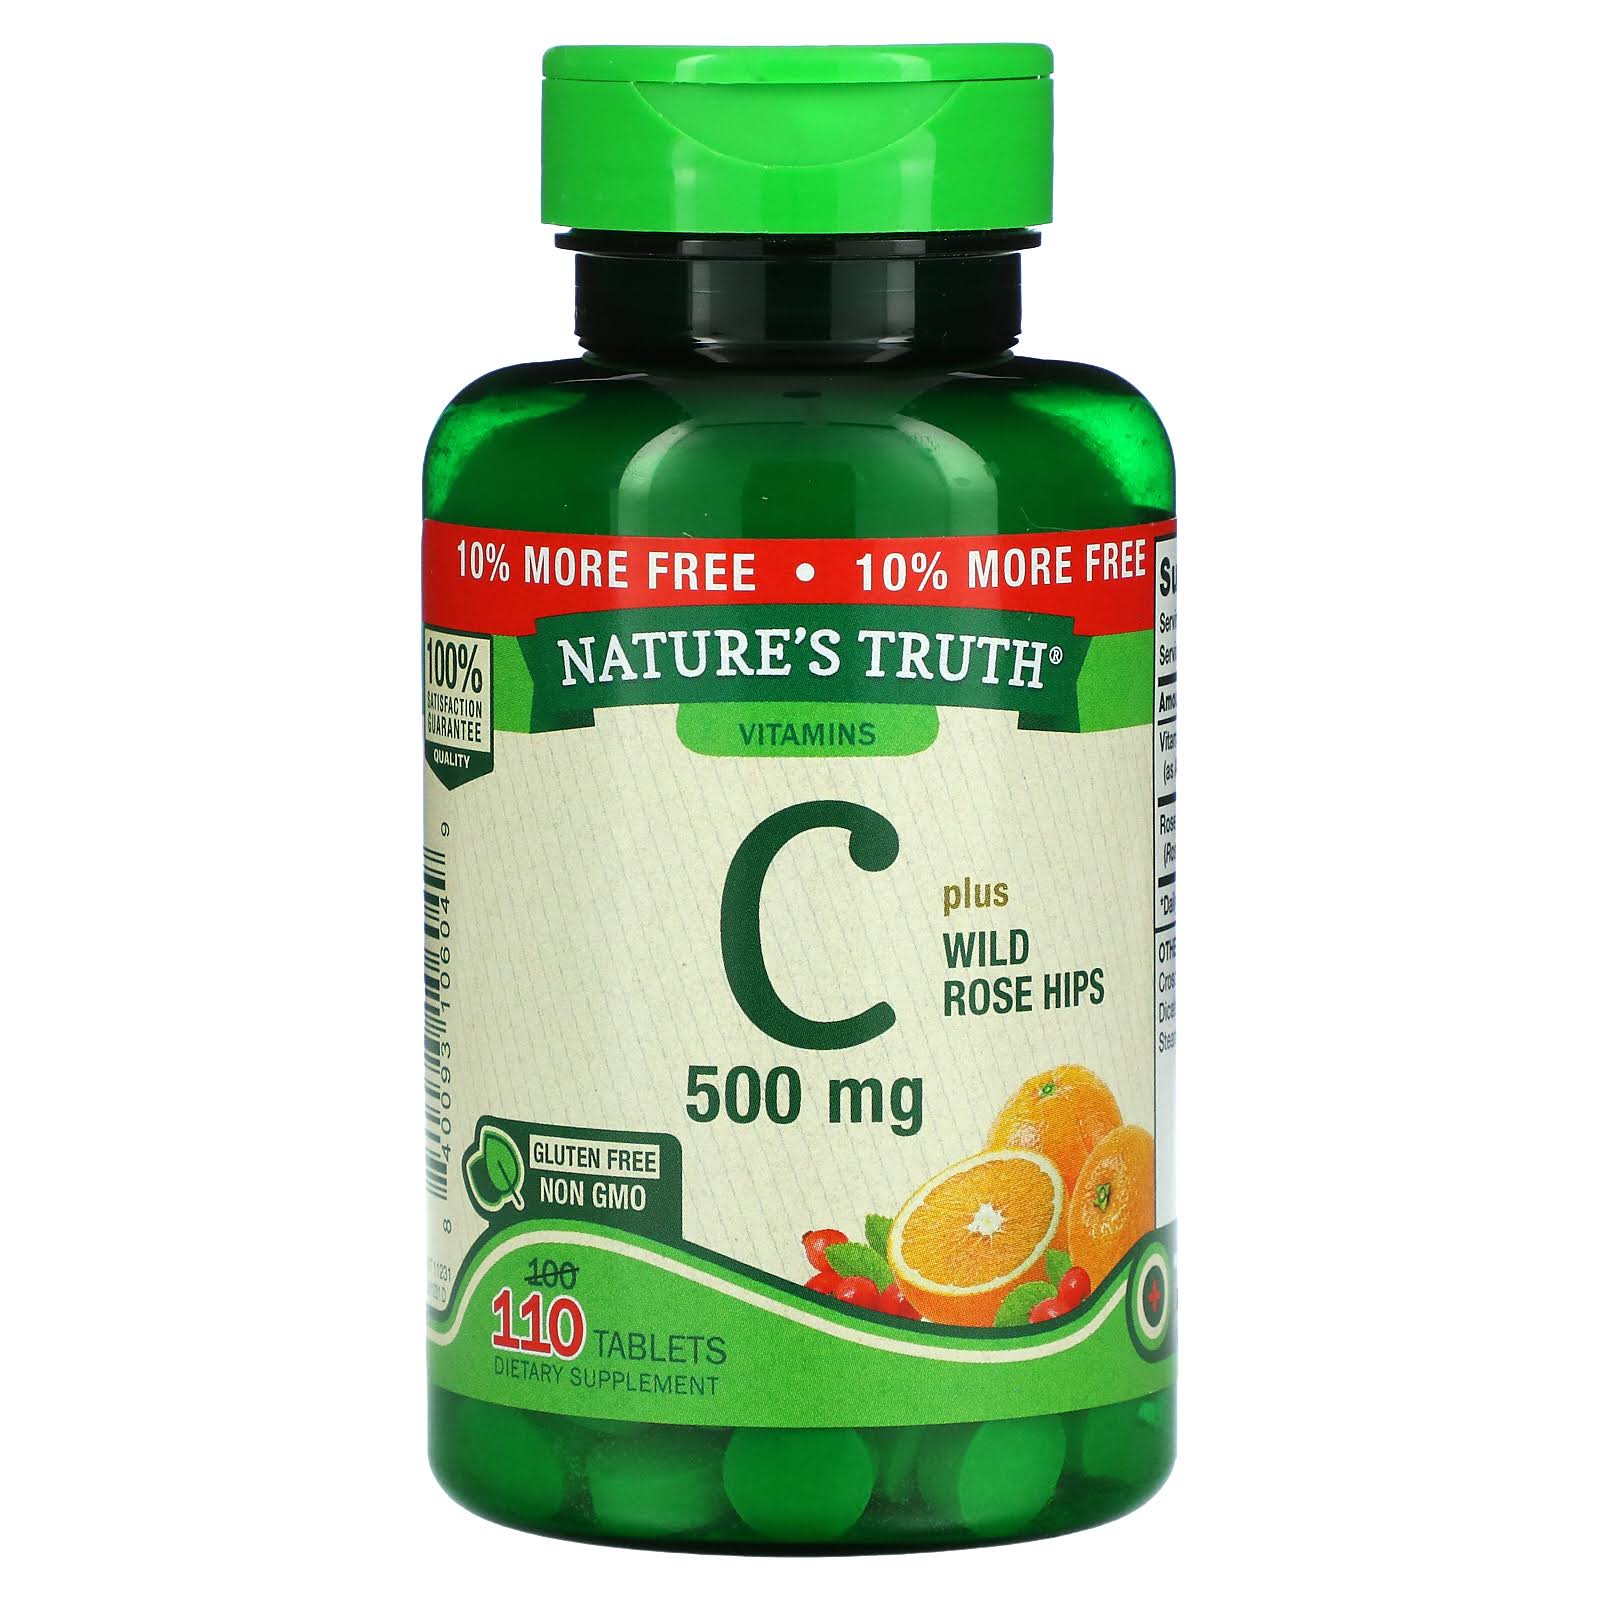 Nature's Truth Vitamin C, 500 mg, Plus Wild Rose Hips, Tablets - 110 tablets